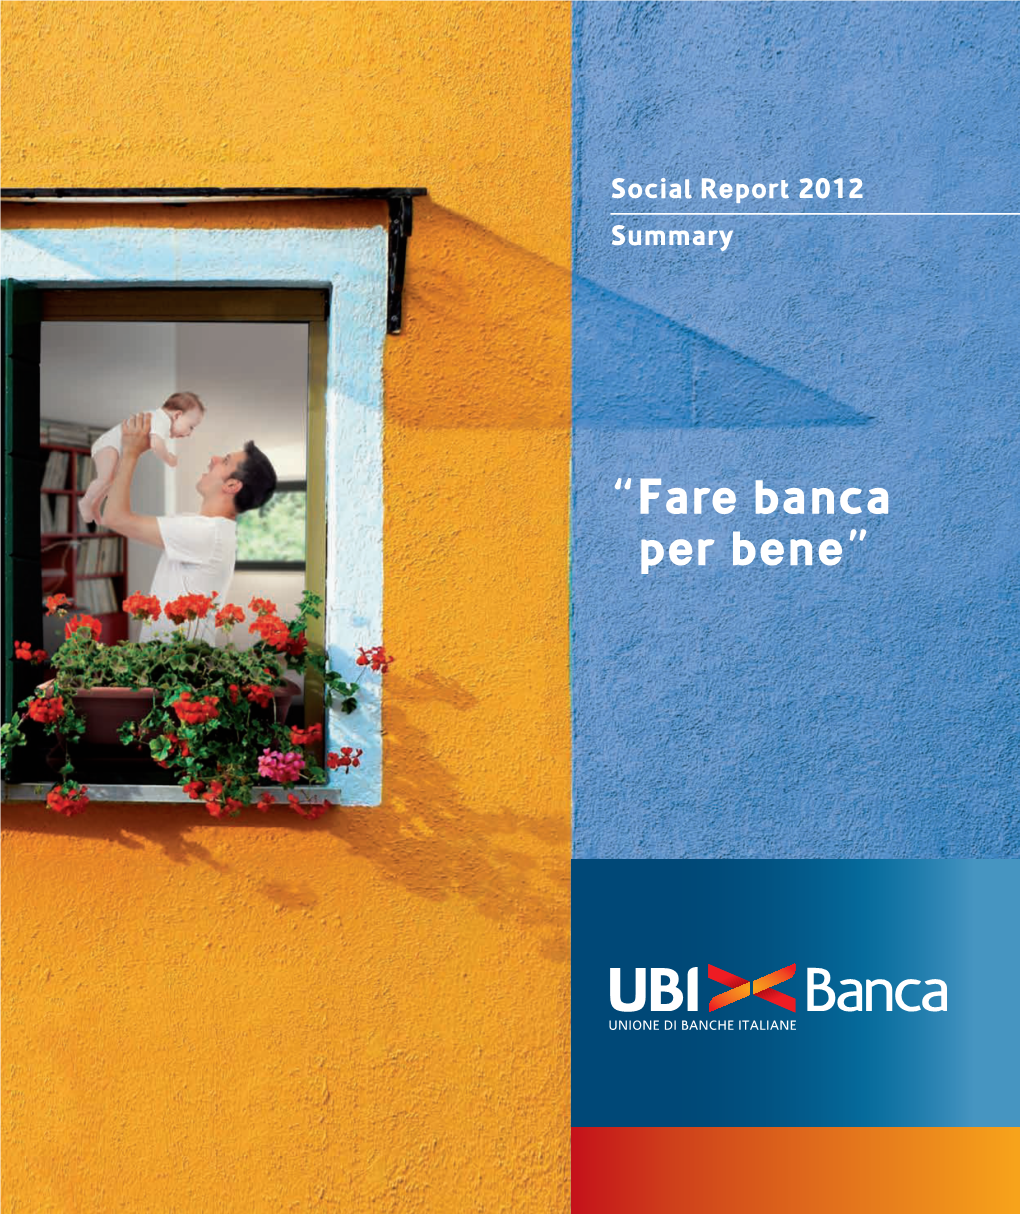 UBI Banca Group Was Born on 1St April 2007 from the Merger of BPU Banca and Banca Lombarda E Piemontese